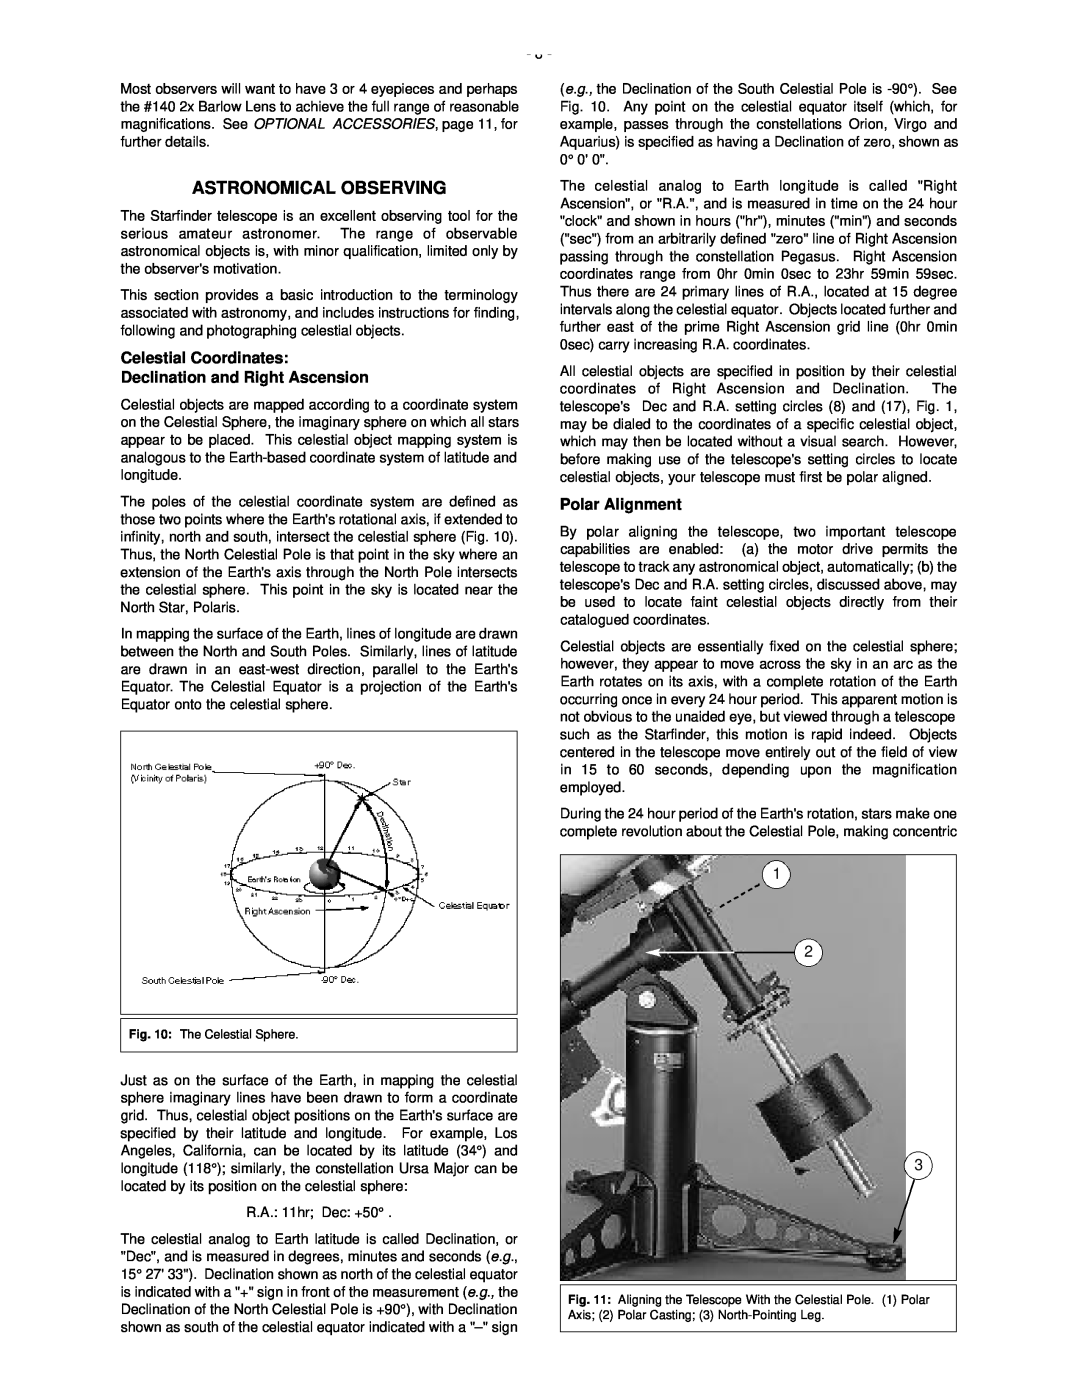 Meade 50 AZ-T Astronomical Observing, Celestial Coordinates, Declination and Right Ascension, Polar Alignment 